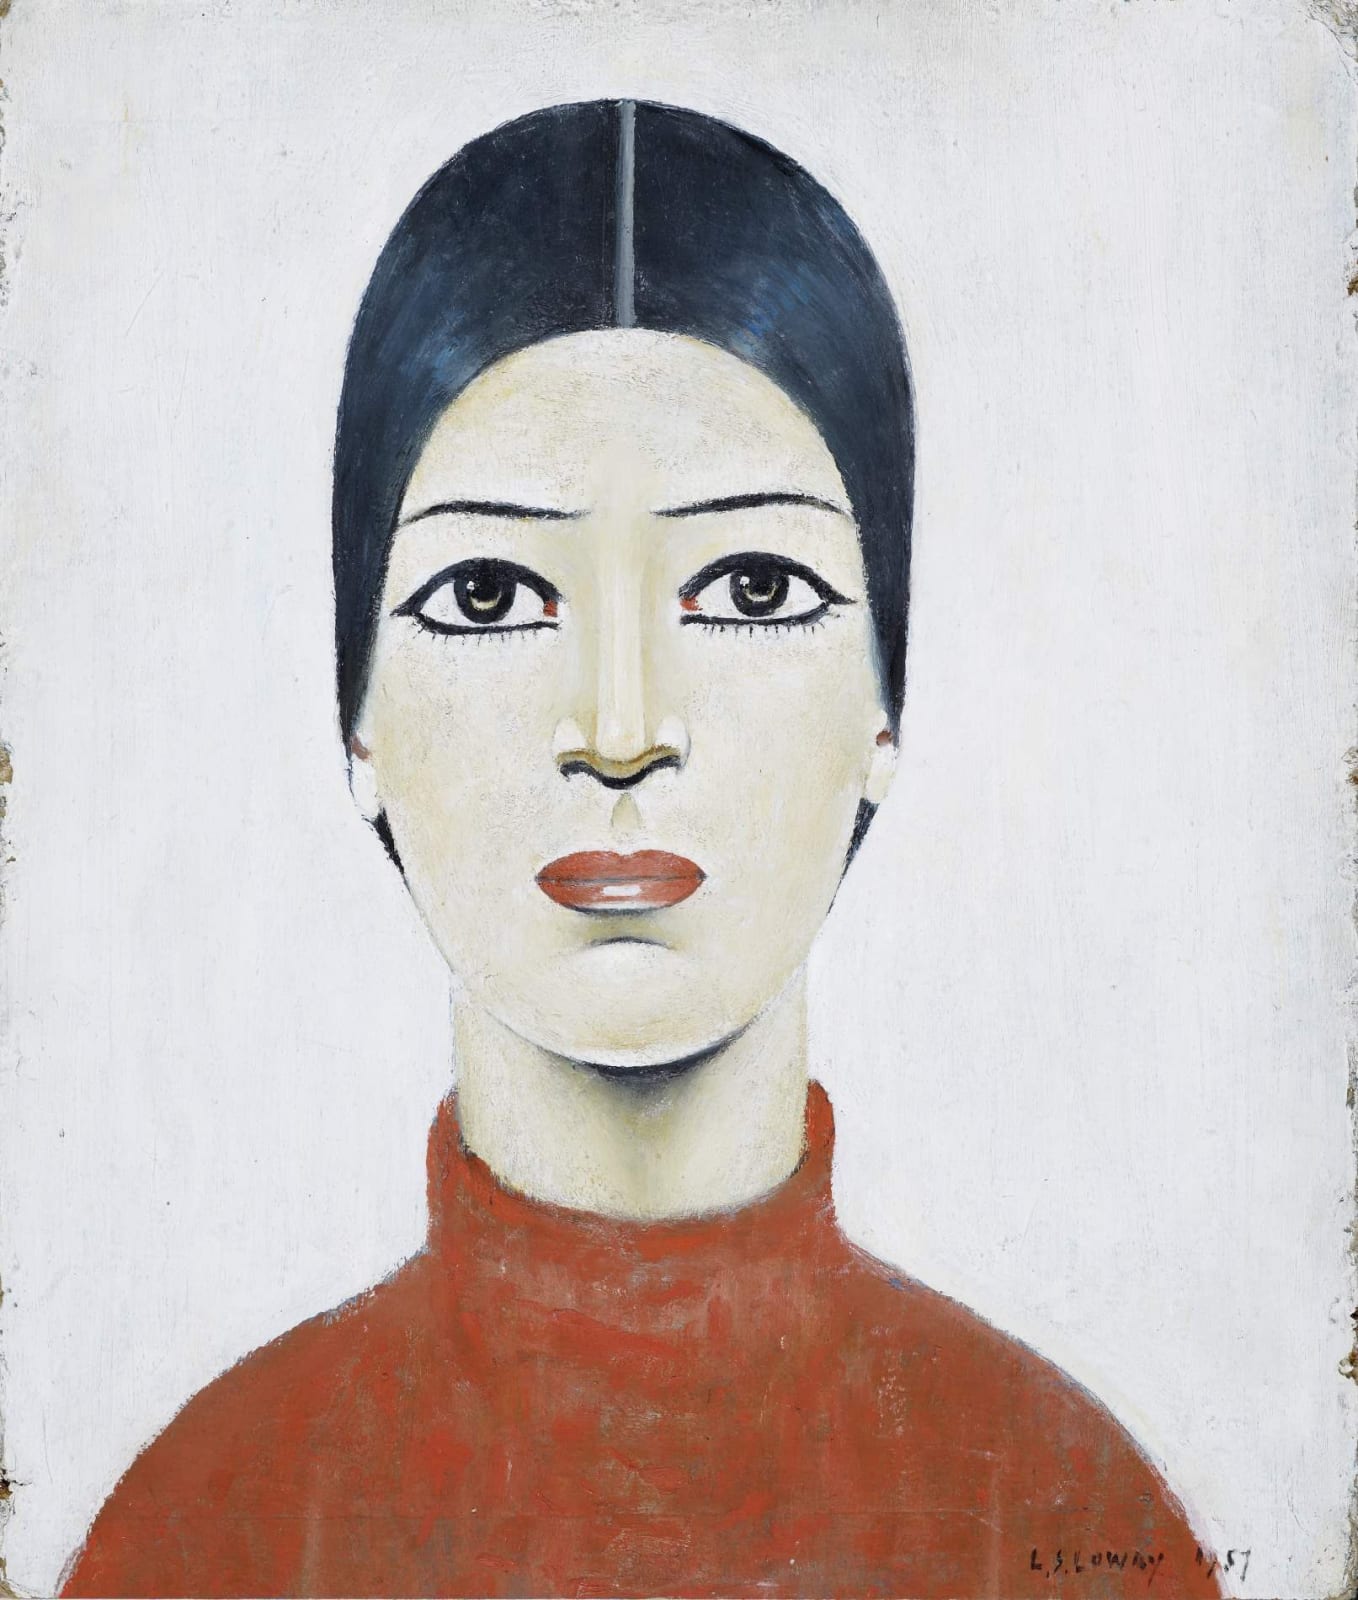 L. S. Lowry (1887-1976) Portrait of Ann 1957 Oil on board 35.5 x 30.5 cm The Lowry Collection, Salford To see and discover more about this artist click here